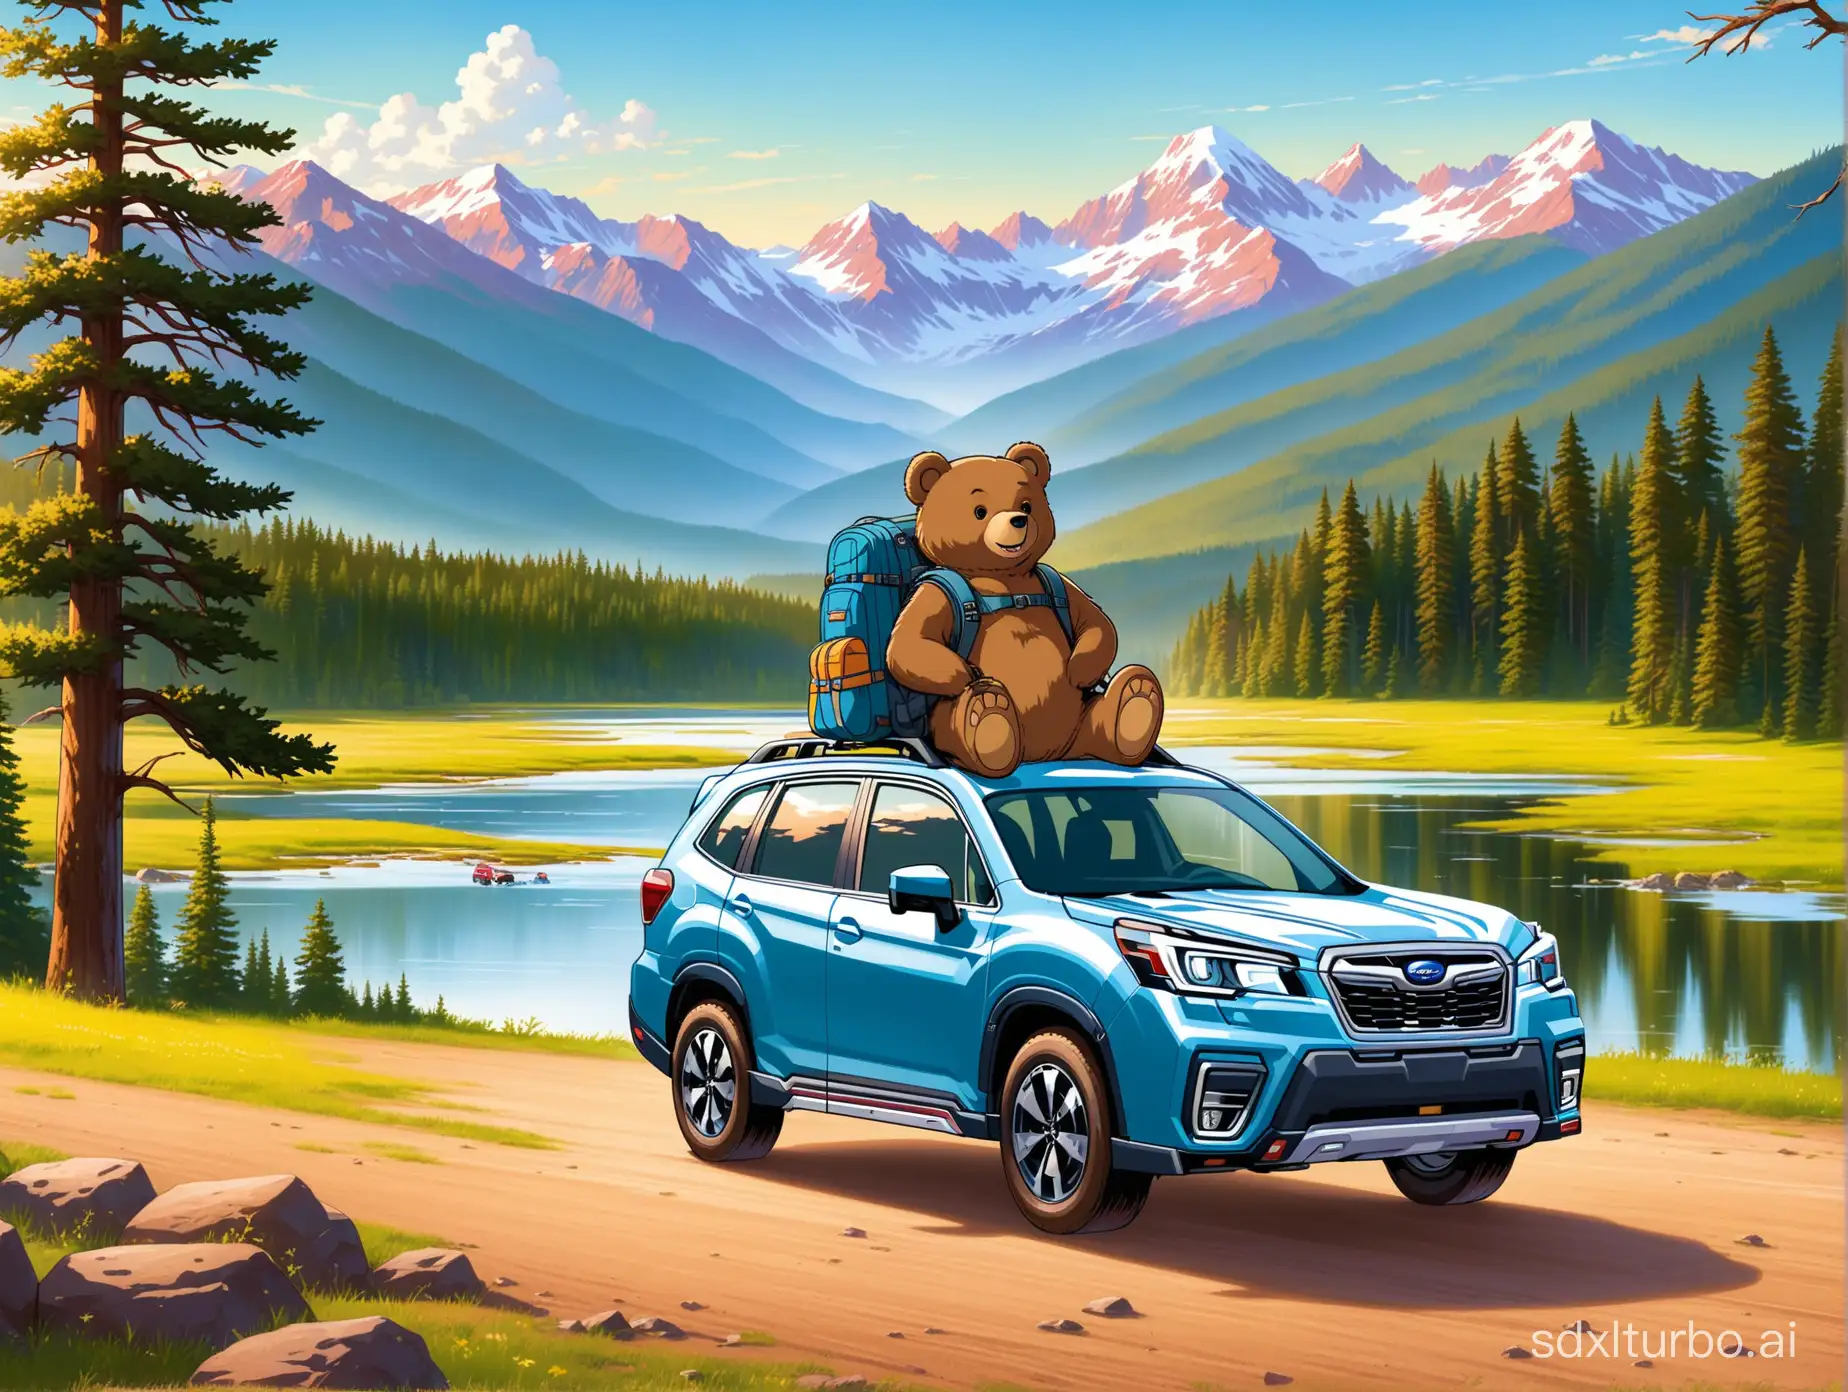 Mr-Bear-Adventuring-Across-the-American-Landscape-with-Subaru-Forester